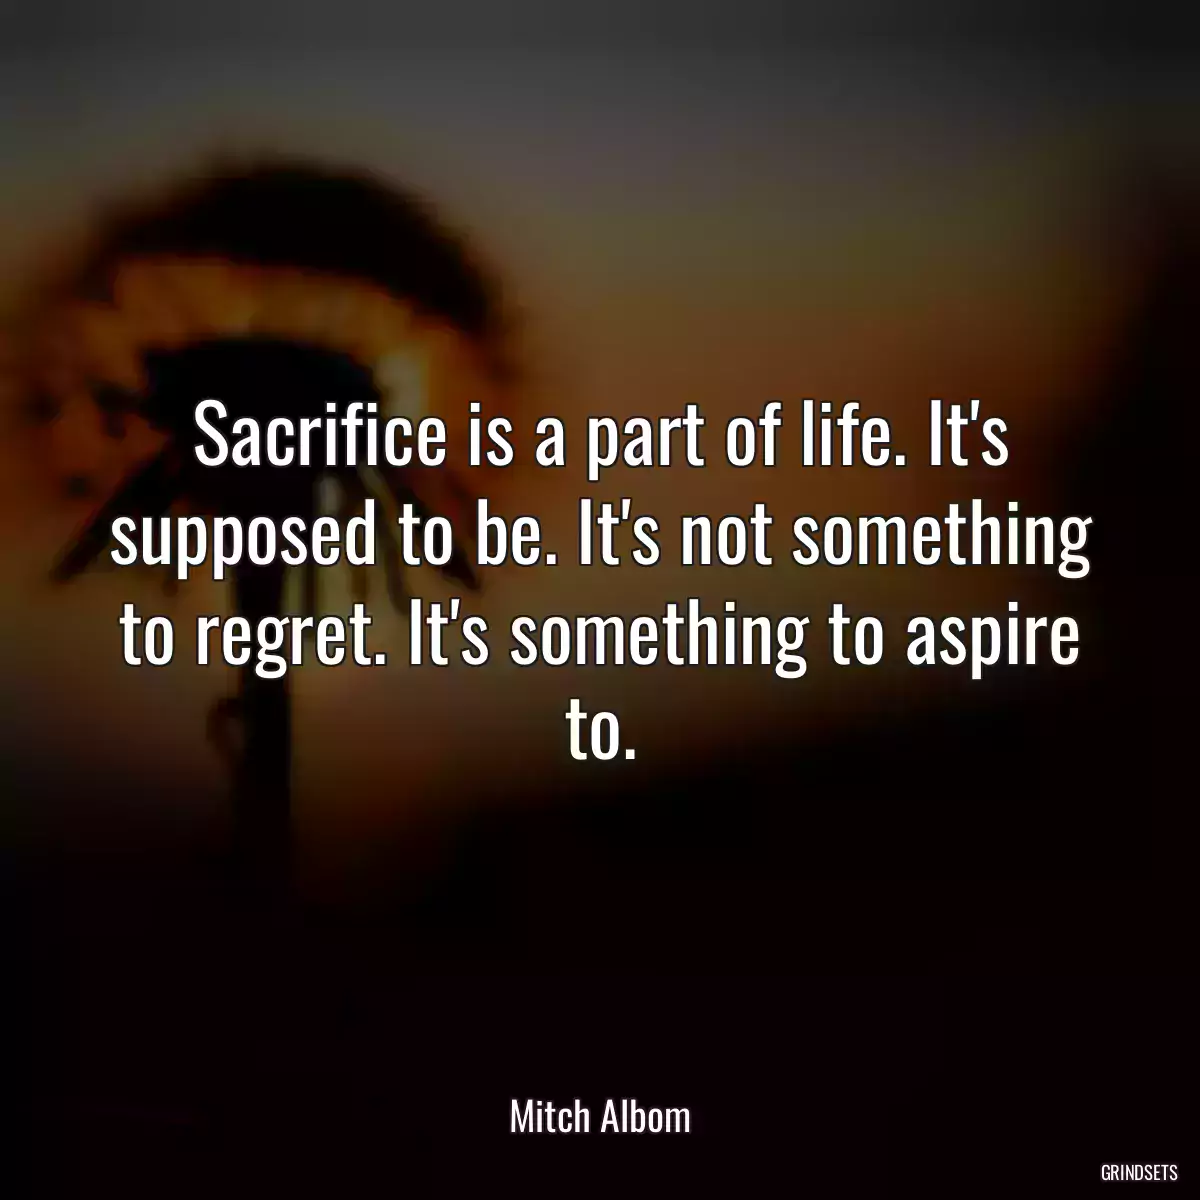 Sacrifice is a part of life. It\'s supposed to be. It\'s not something to regret. It\'s something to aspire to.